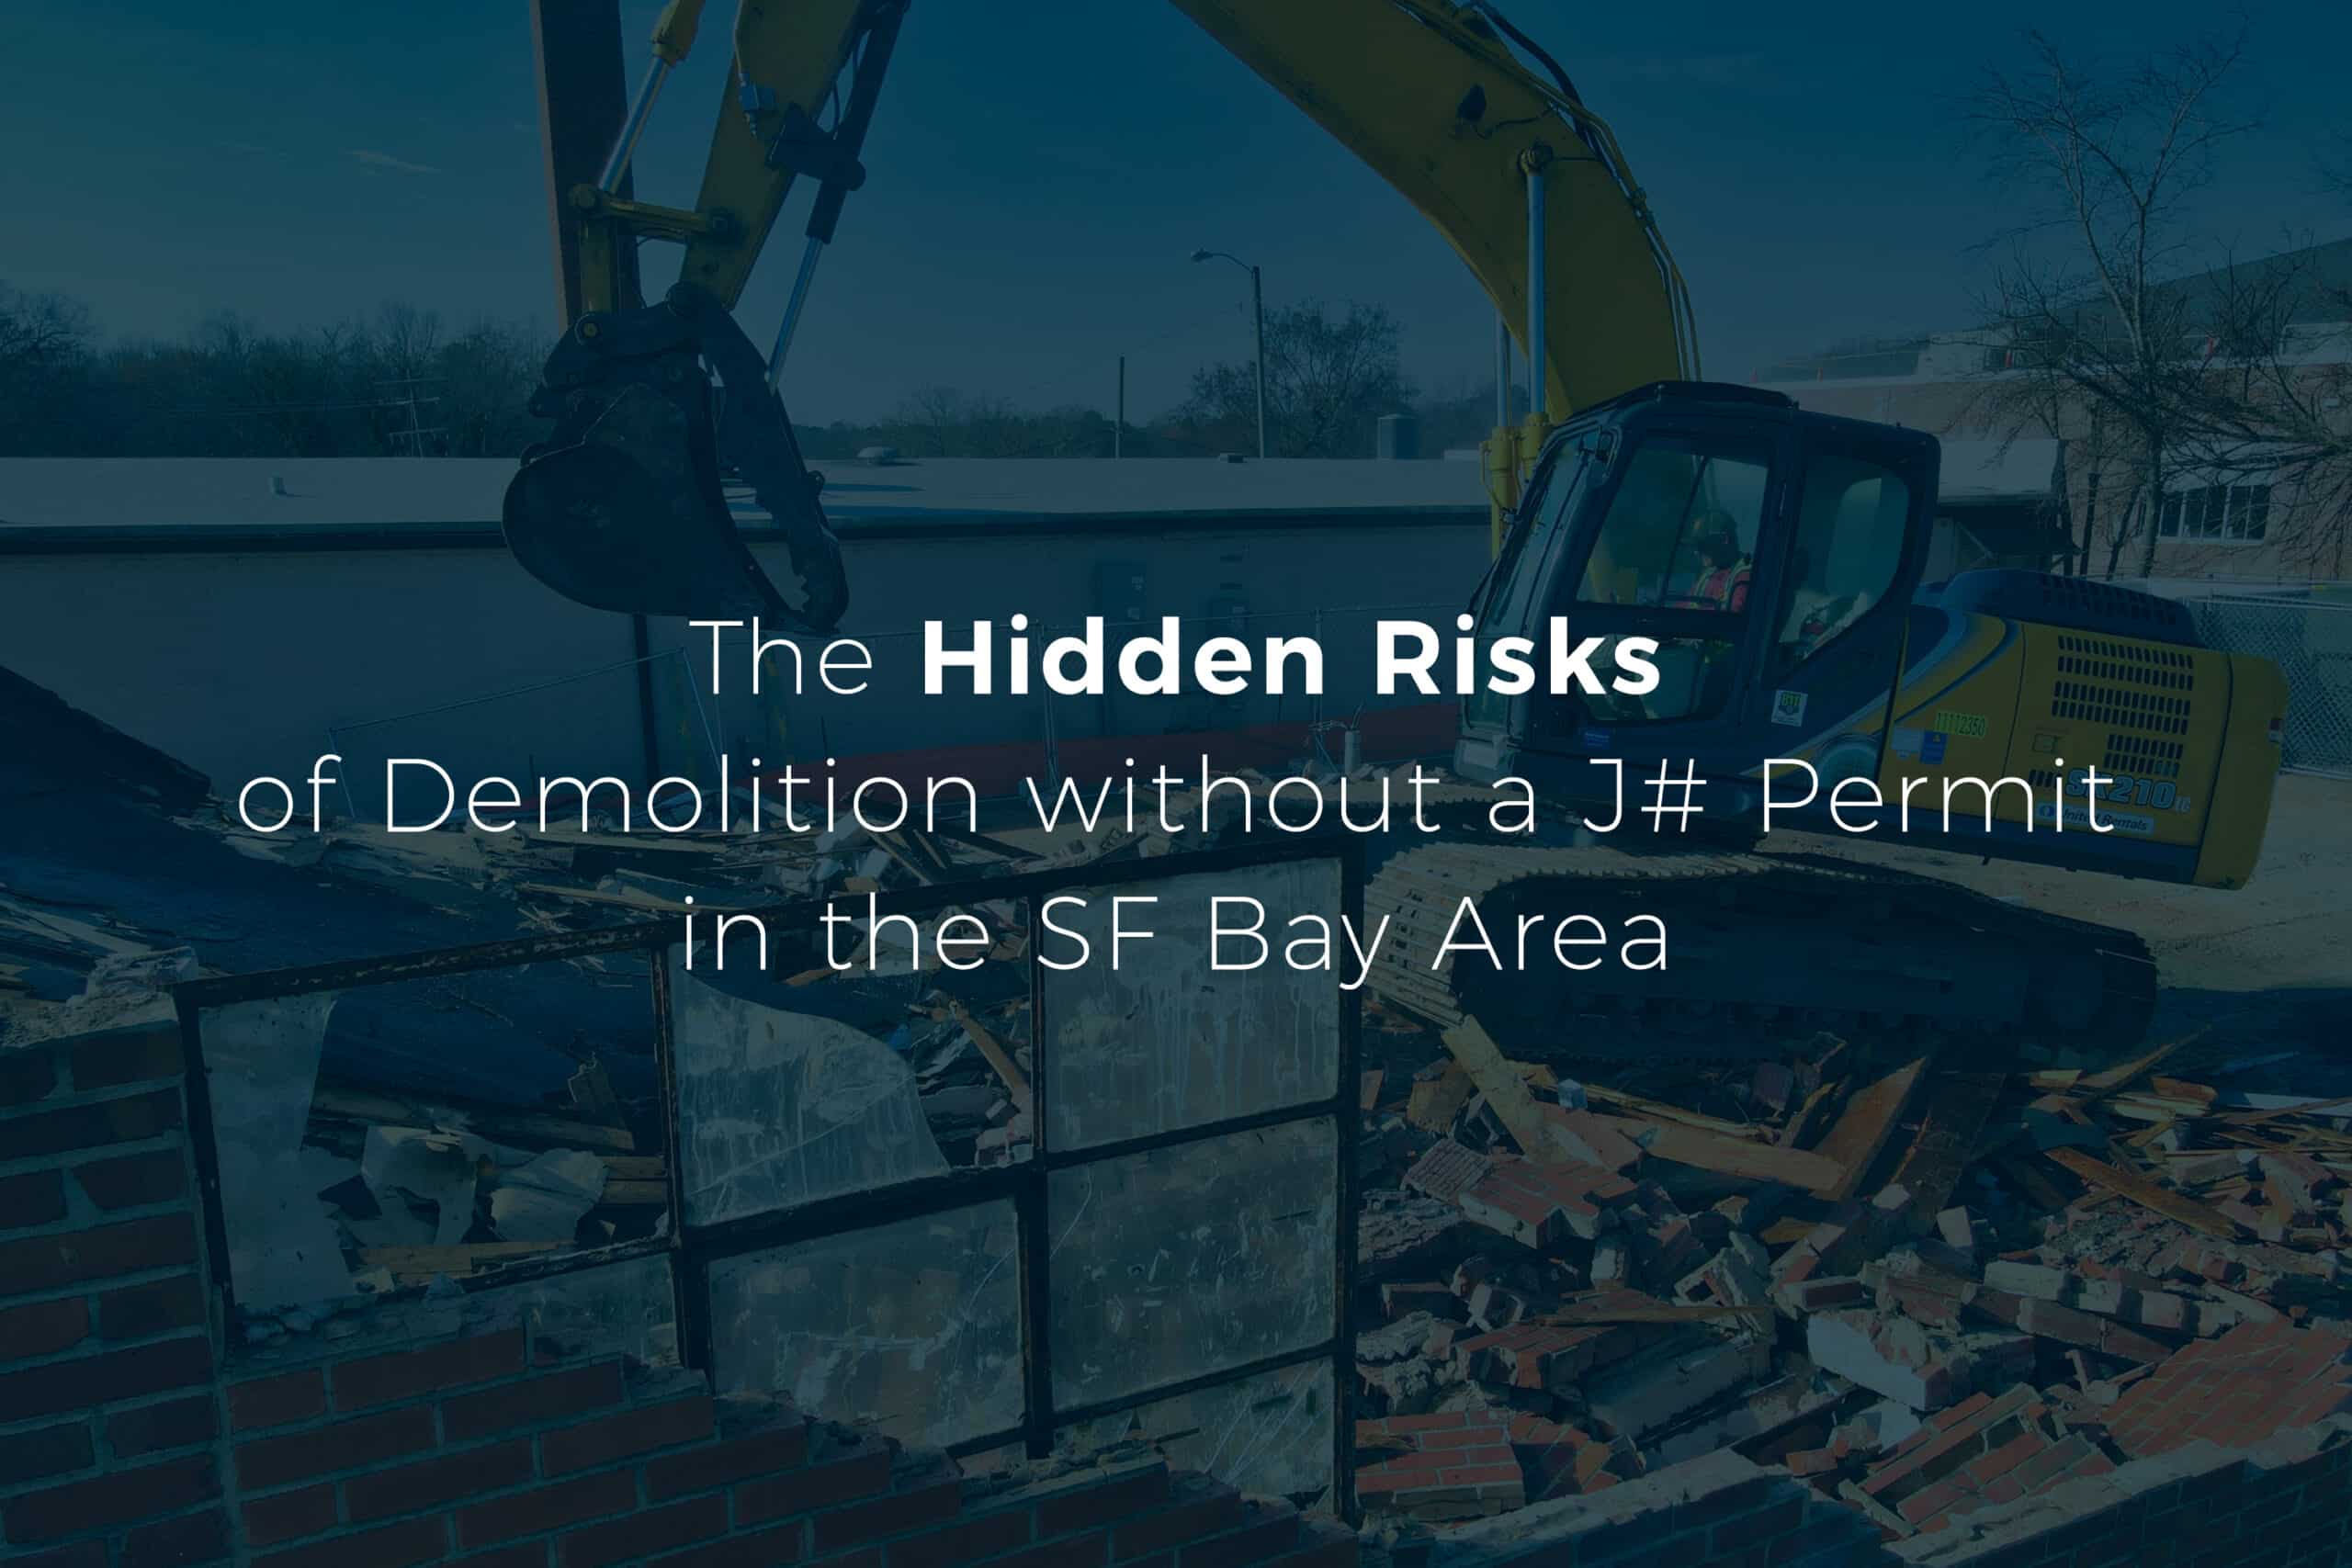 A home undergoing demolition with a headline "The Hidden Risks of Demolition without a J# Permit in the SF Bay Area.